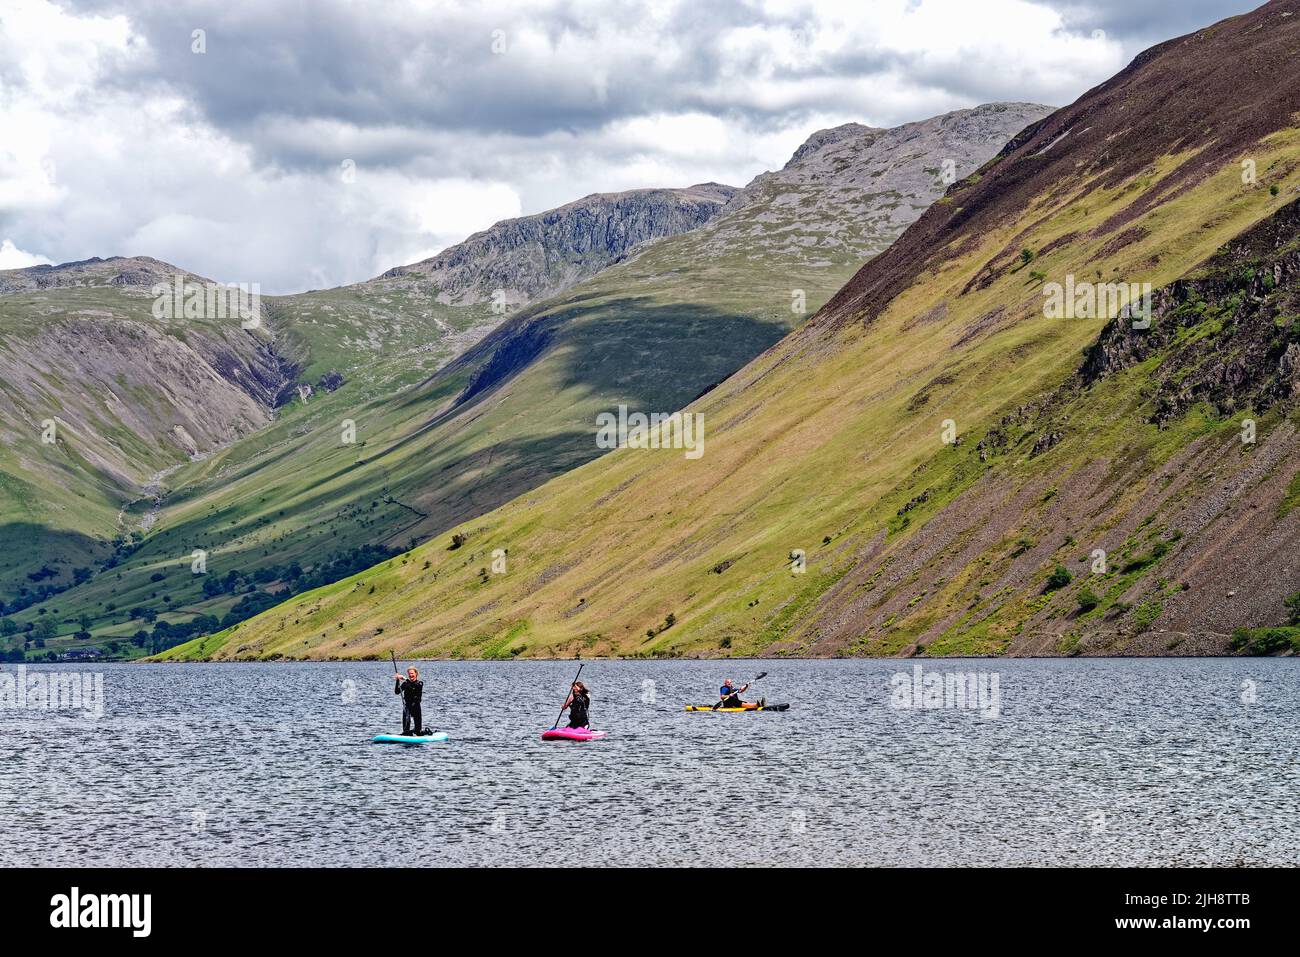 Paddleboarders on Wastwater lake with the dramatic scree slopes in the background, on a summers day Wasdale, Cumbria England UK Stock Photo